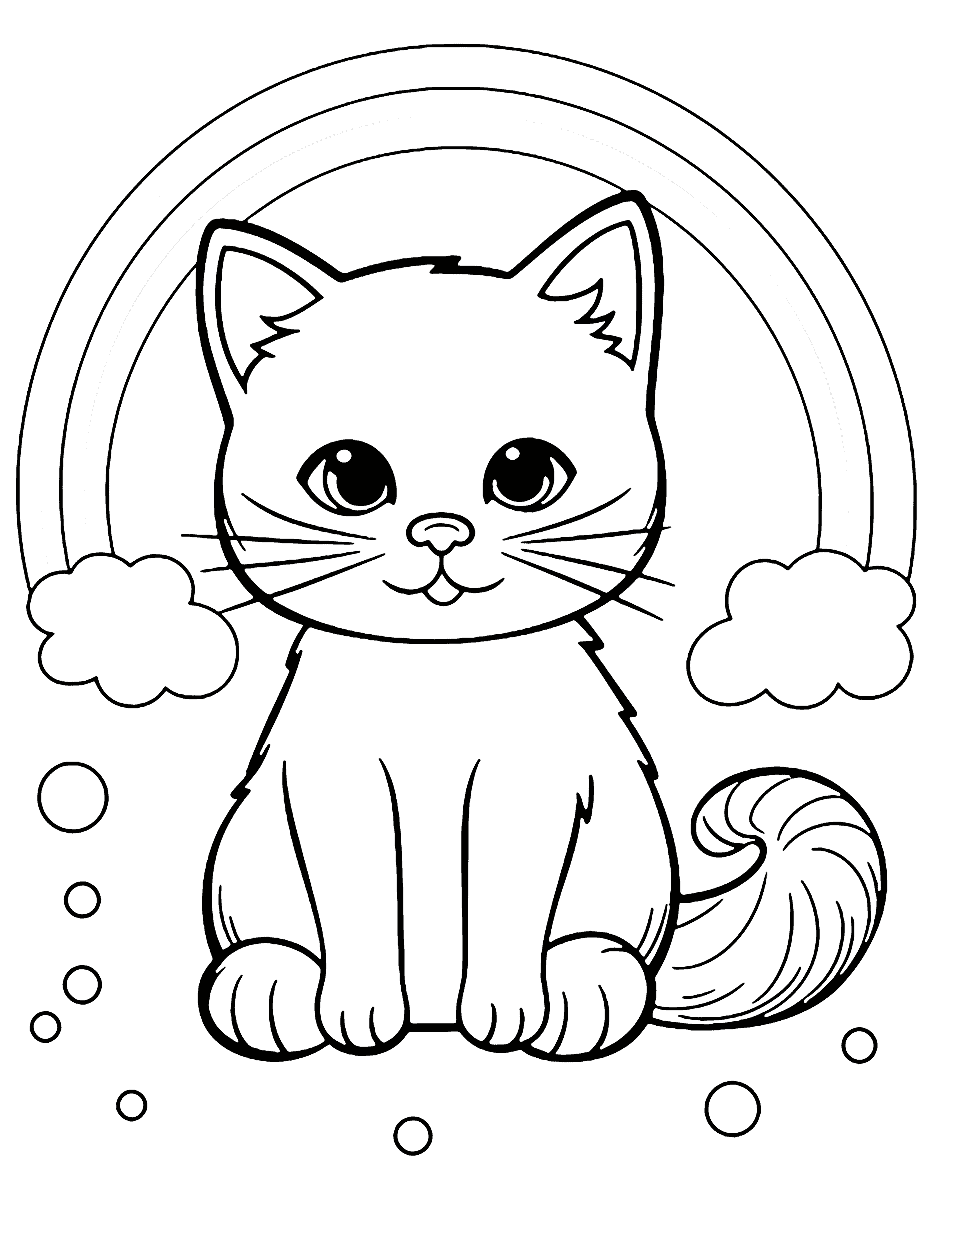 Cat and a Rainbow Coloring Page - A cat sitting under a rainbow, easy for preschoolers to color.